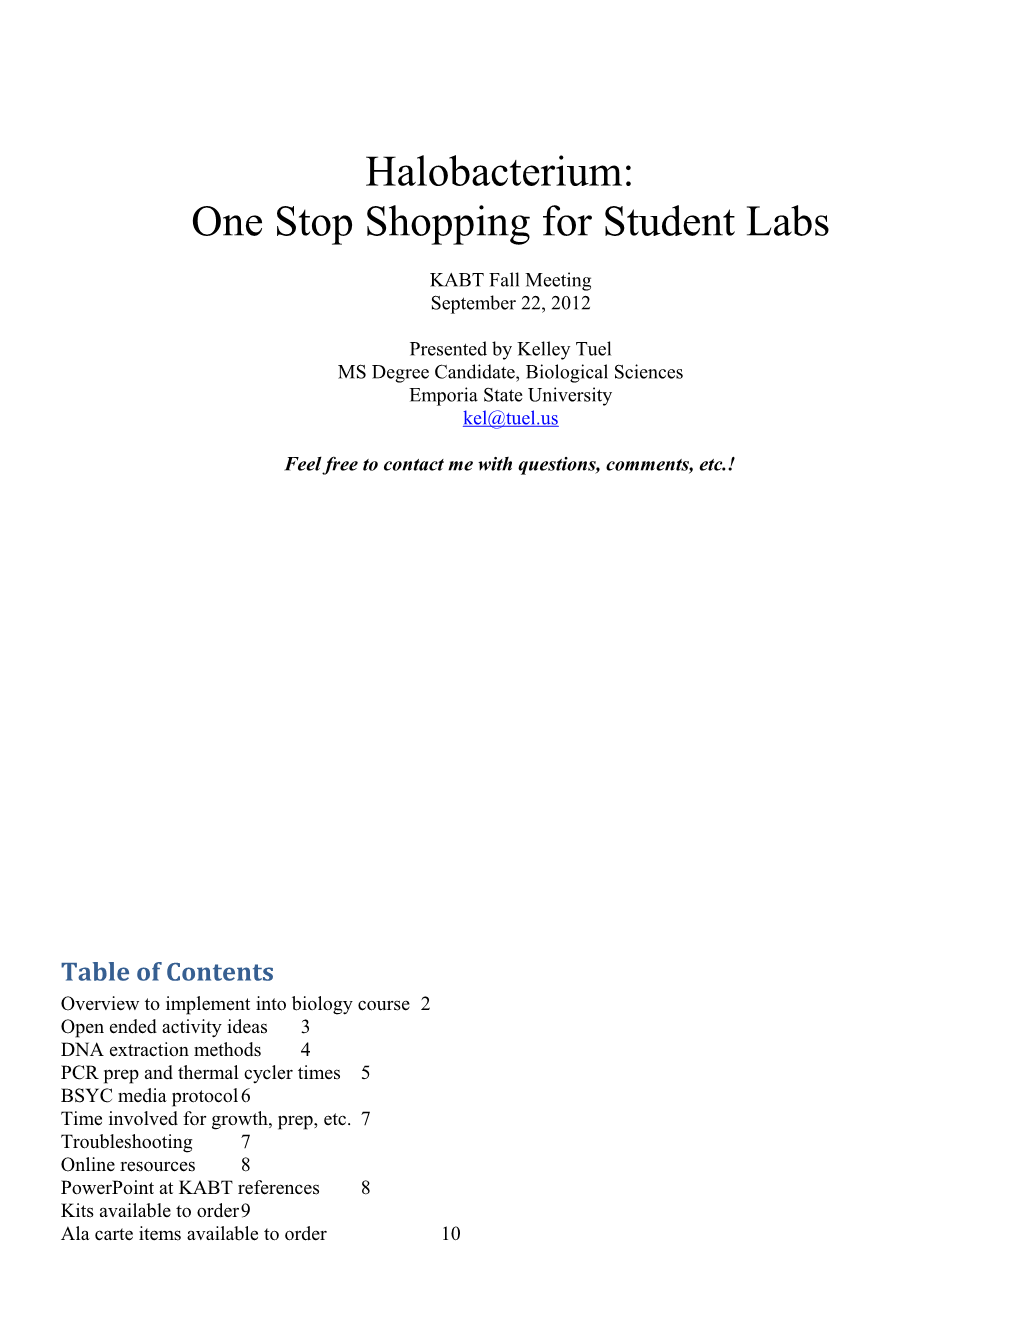 One Stop Shopping for Student Labs